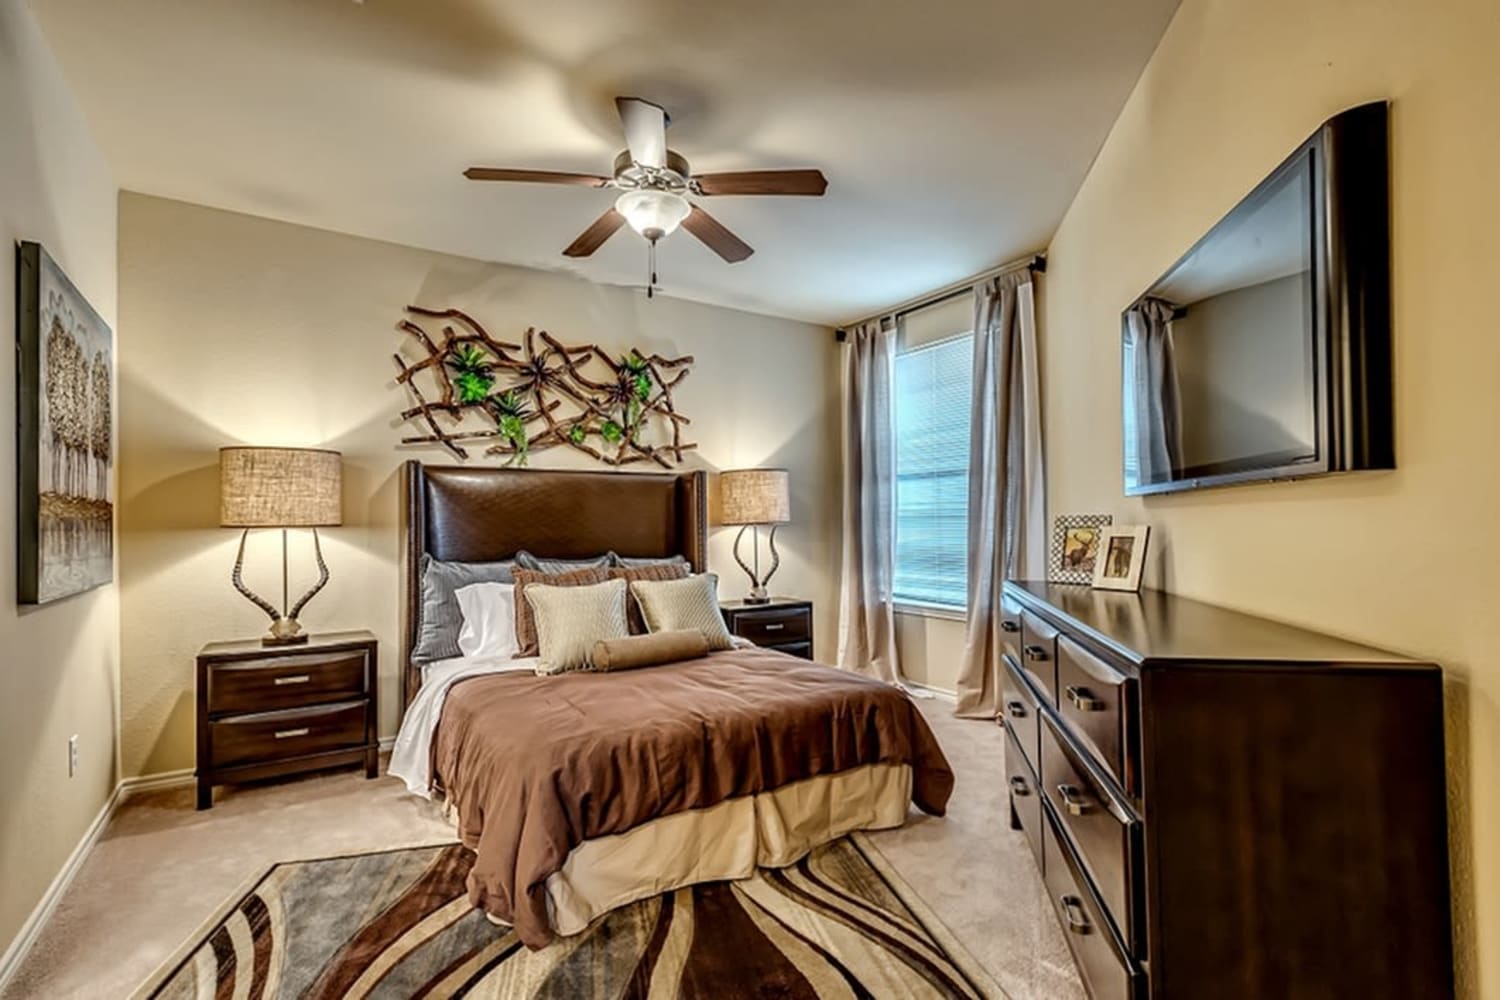 Bedroom at Chateau Mirage Apartment Homes in Lafayette, Louisiana